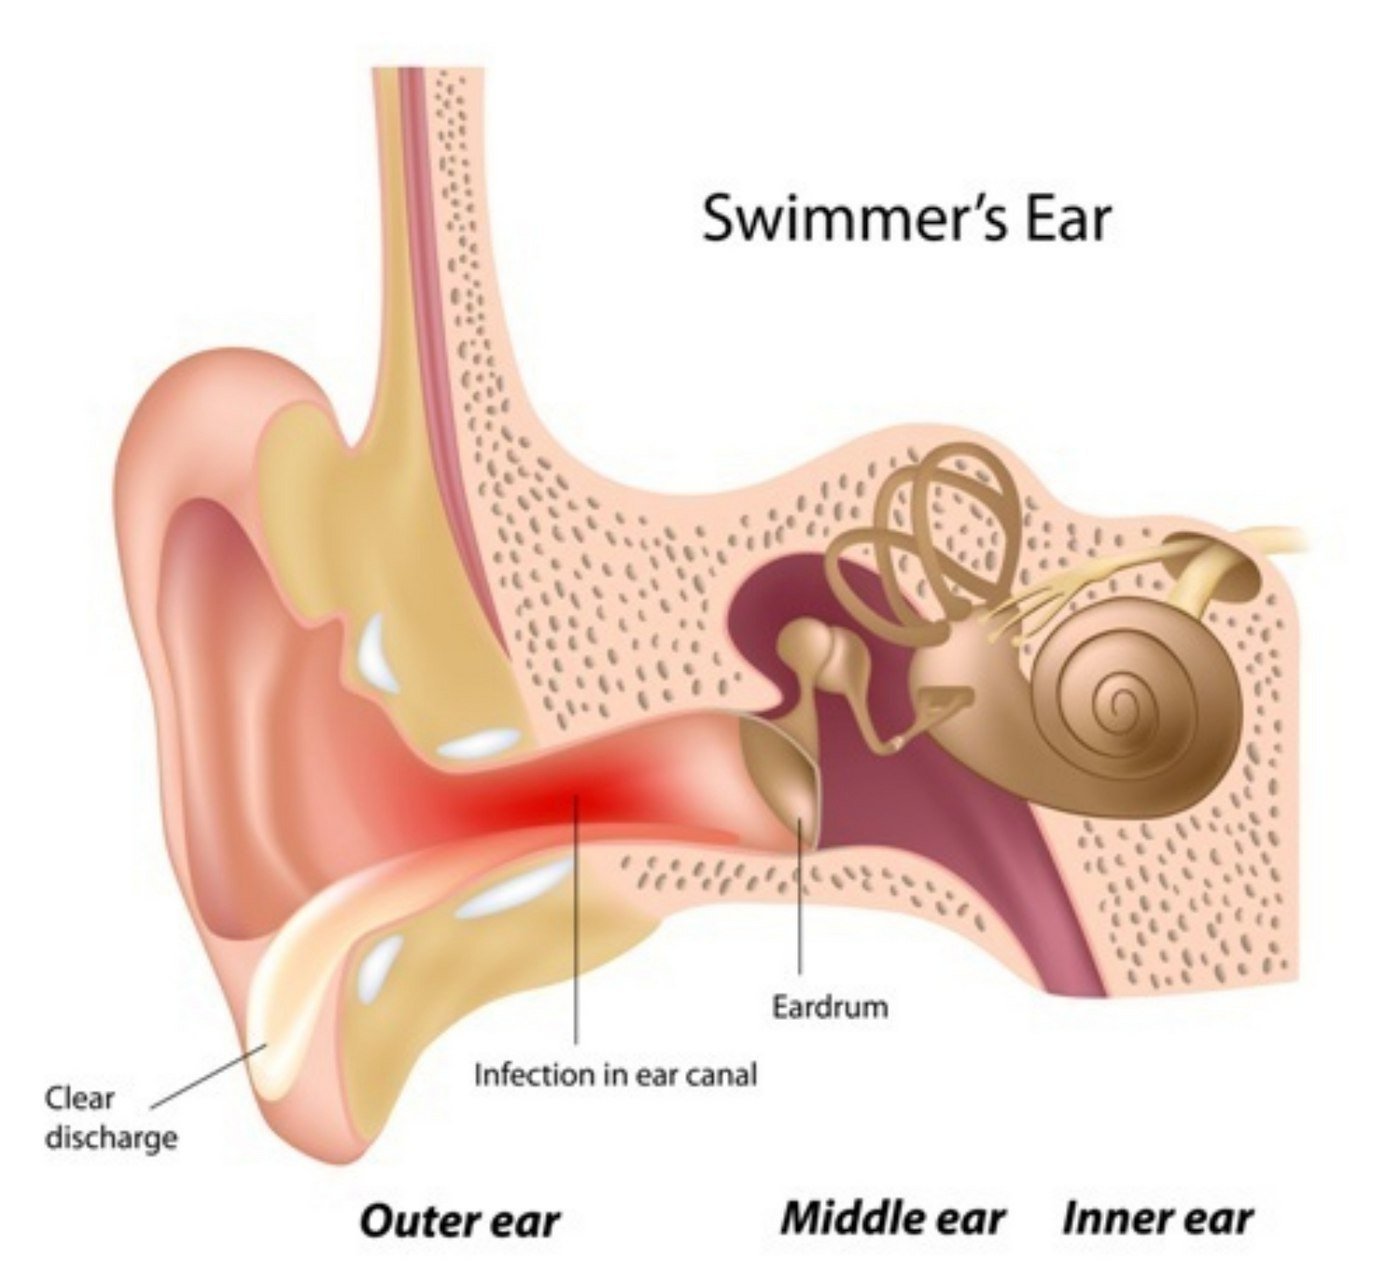 How To Prevent and Get Rid of Swimmer's Ear